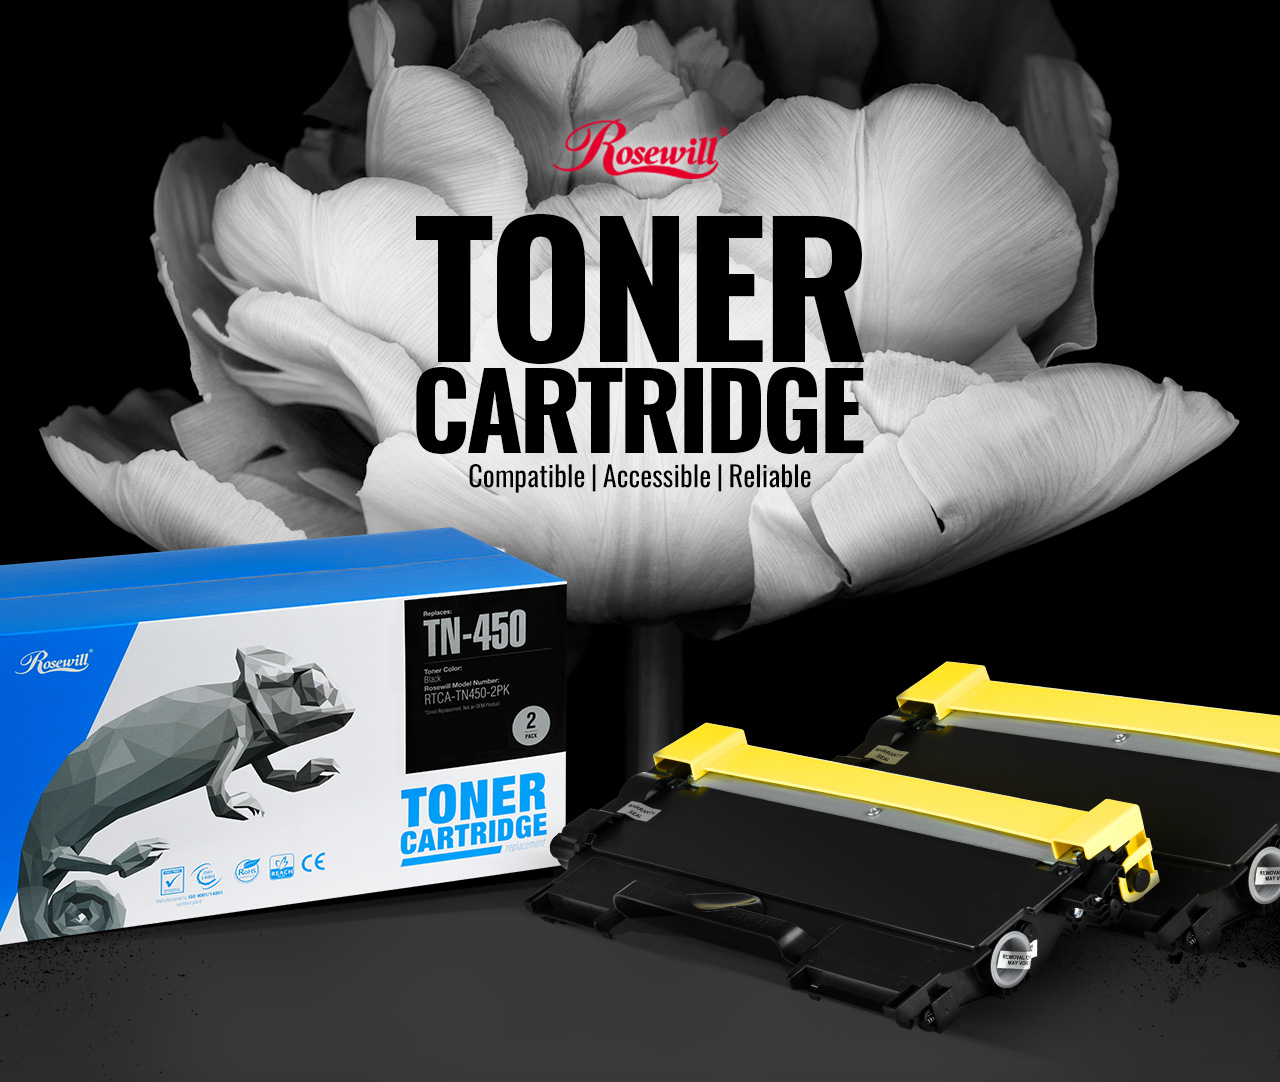 Rosewill RTCA-TN450-2PK Toner Cartridge Banner showing the TN-450 product box, two toners and text that reads: Compatible, Accessible and Reliable on a black-and-white flower